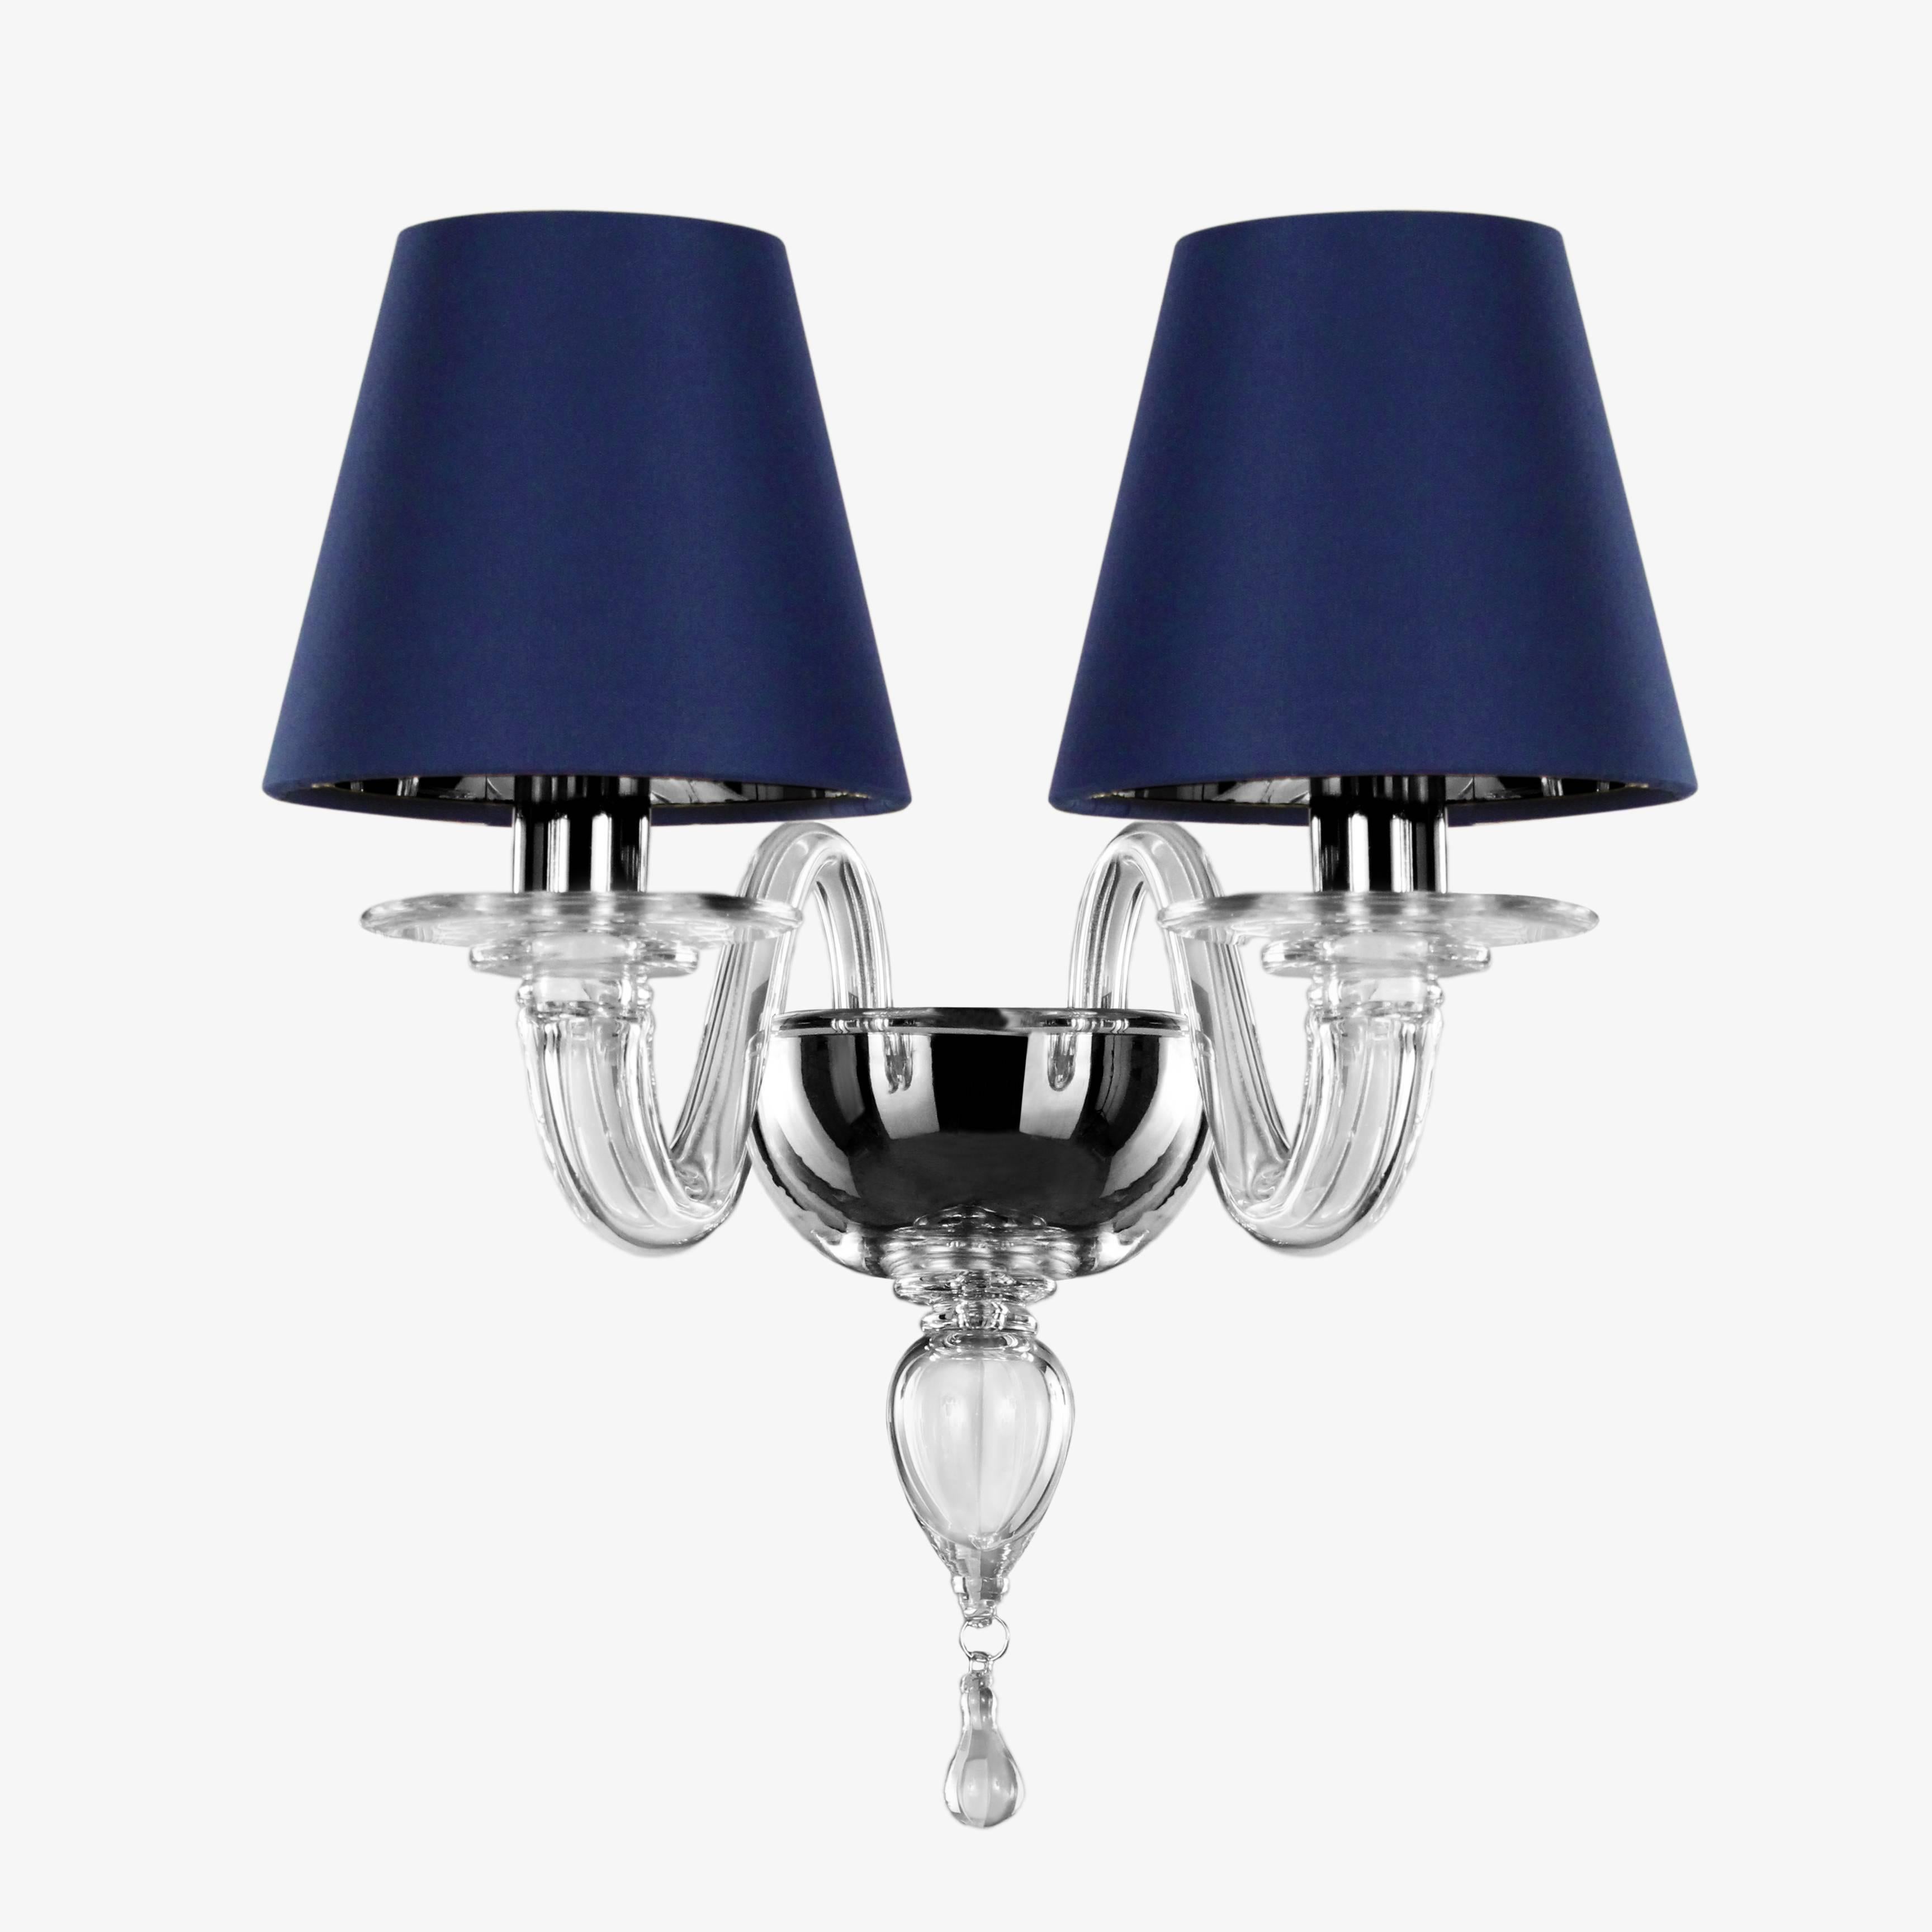 Twice-arms Venetian wall chandelier, handcrafted by Murano Glass Master belong tradition of blown glass Art
Color pure transparent and blue shade.
Silver frame finish.
Matching chandelier, table lamp, floor lamp available.

We can wire it for